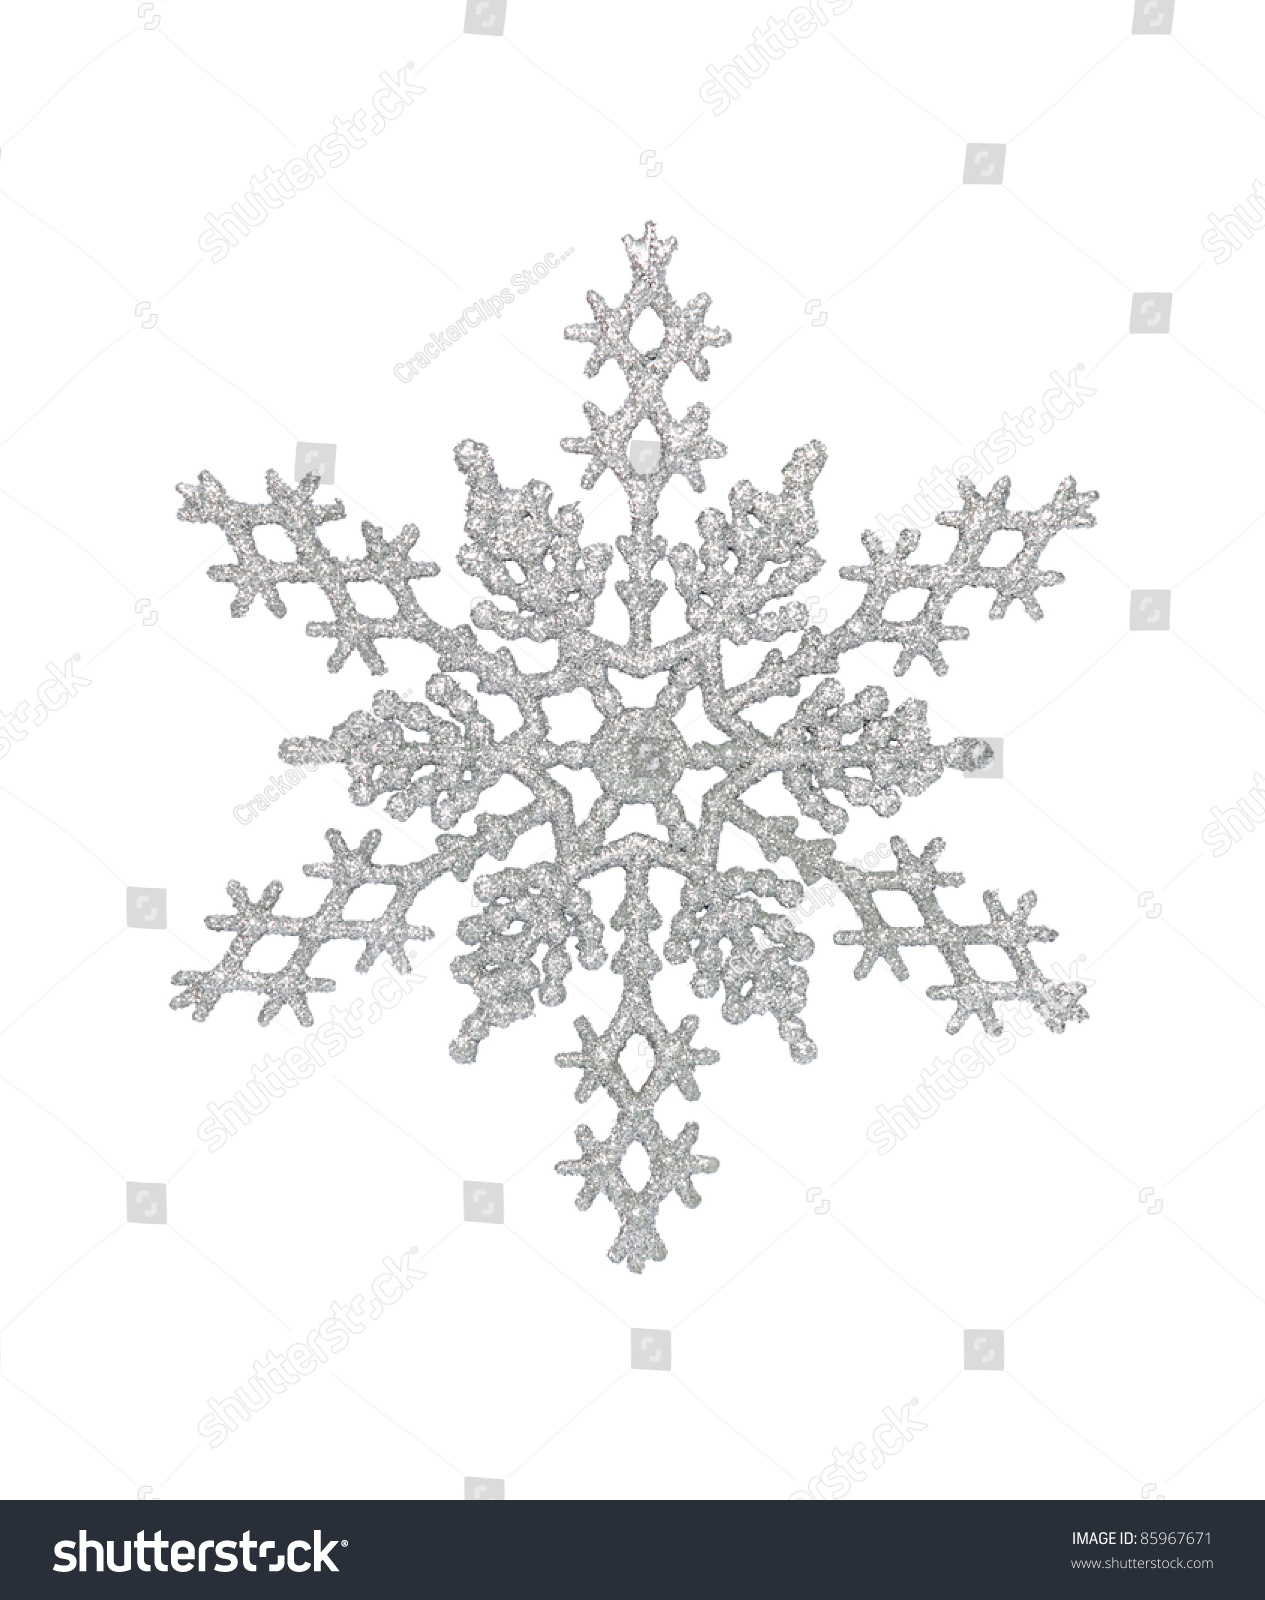 Silver snowflake, isolated w/clipping path #85967671